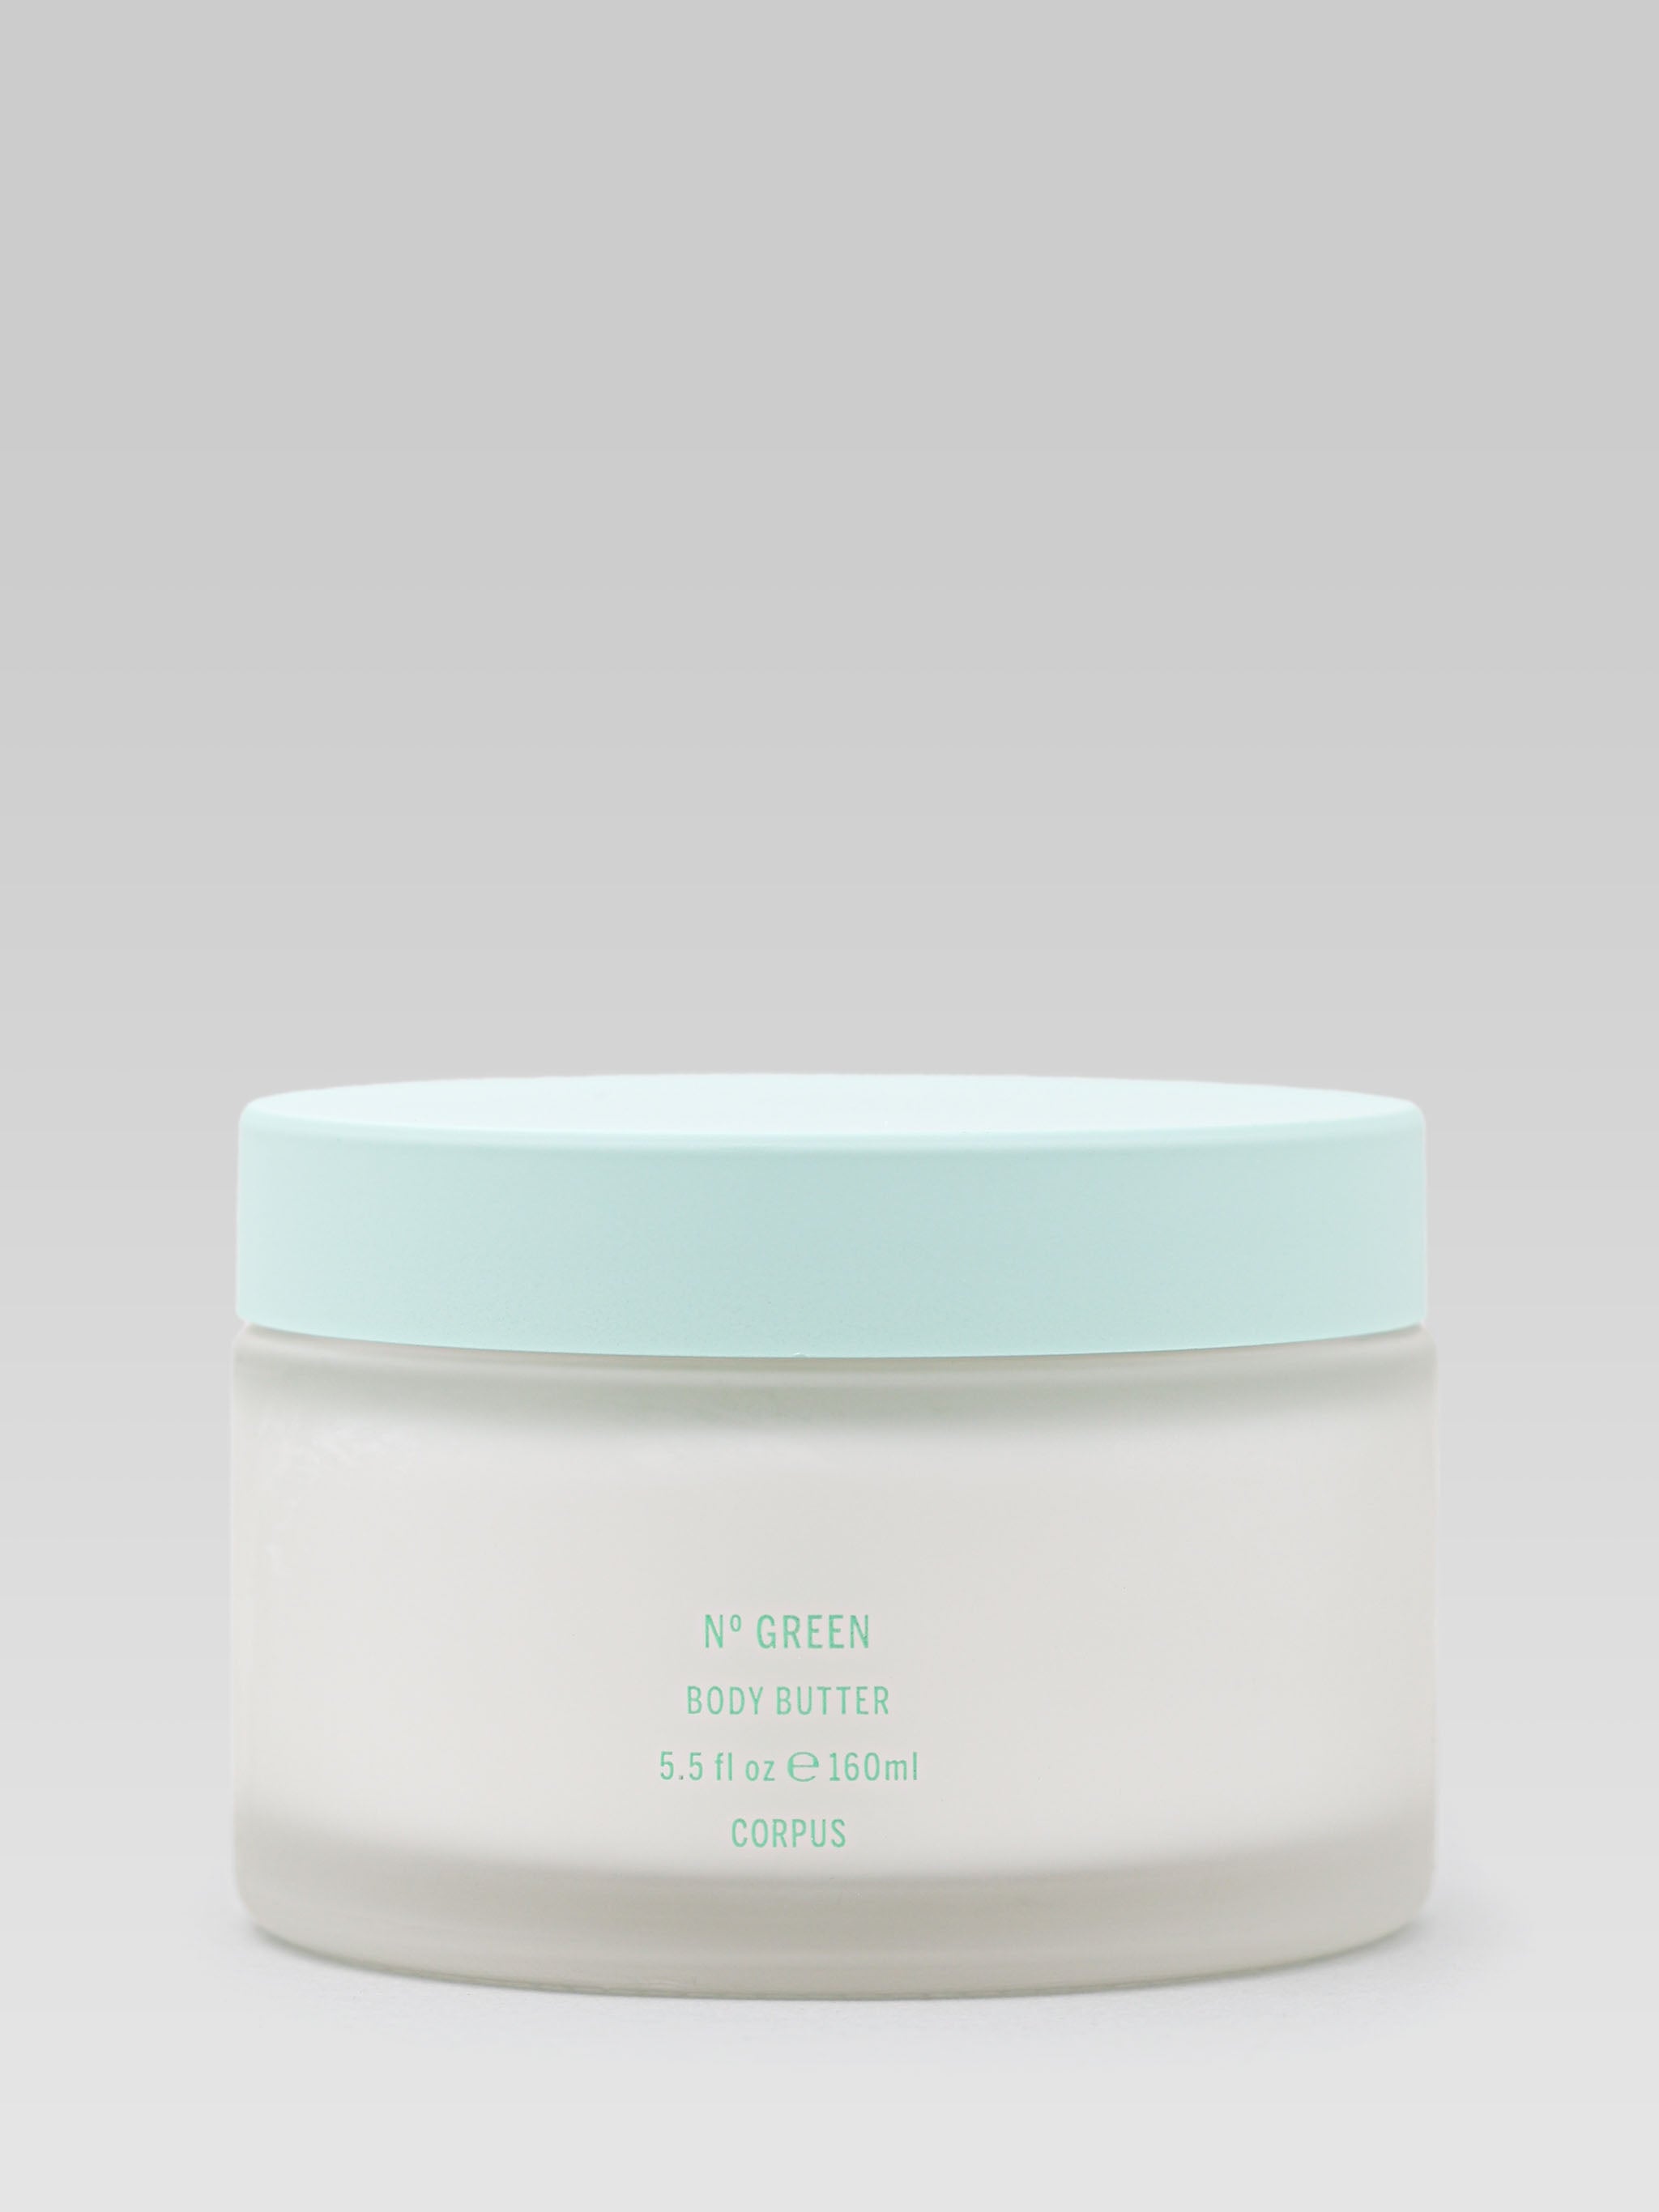 Corpus Body Butter in № Green product shot